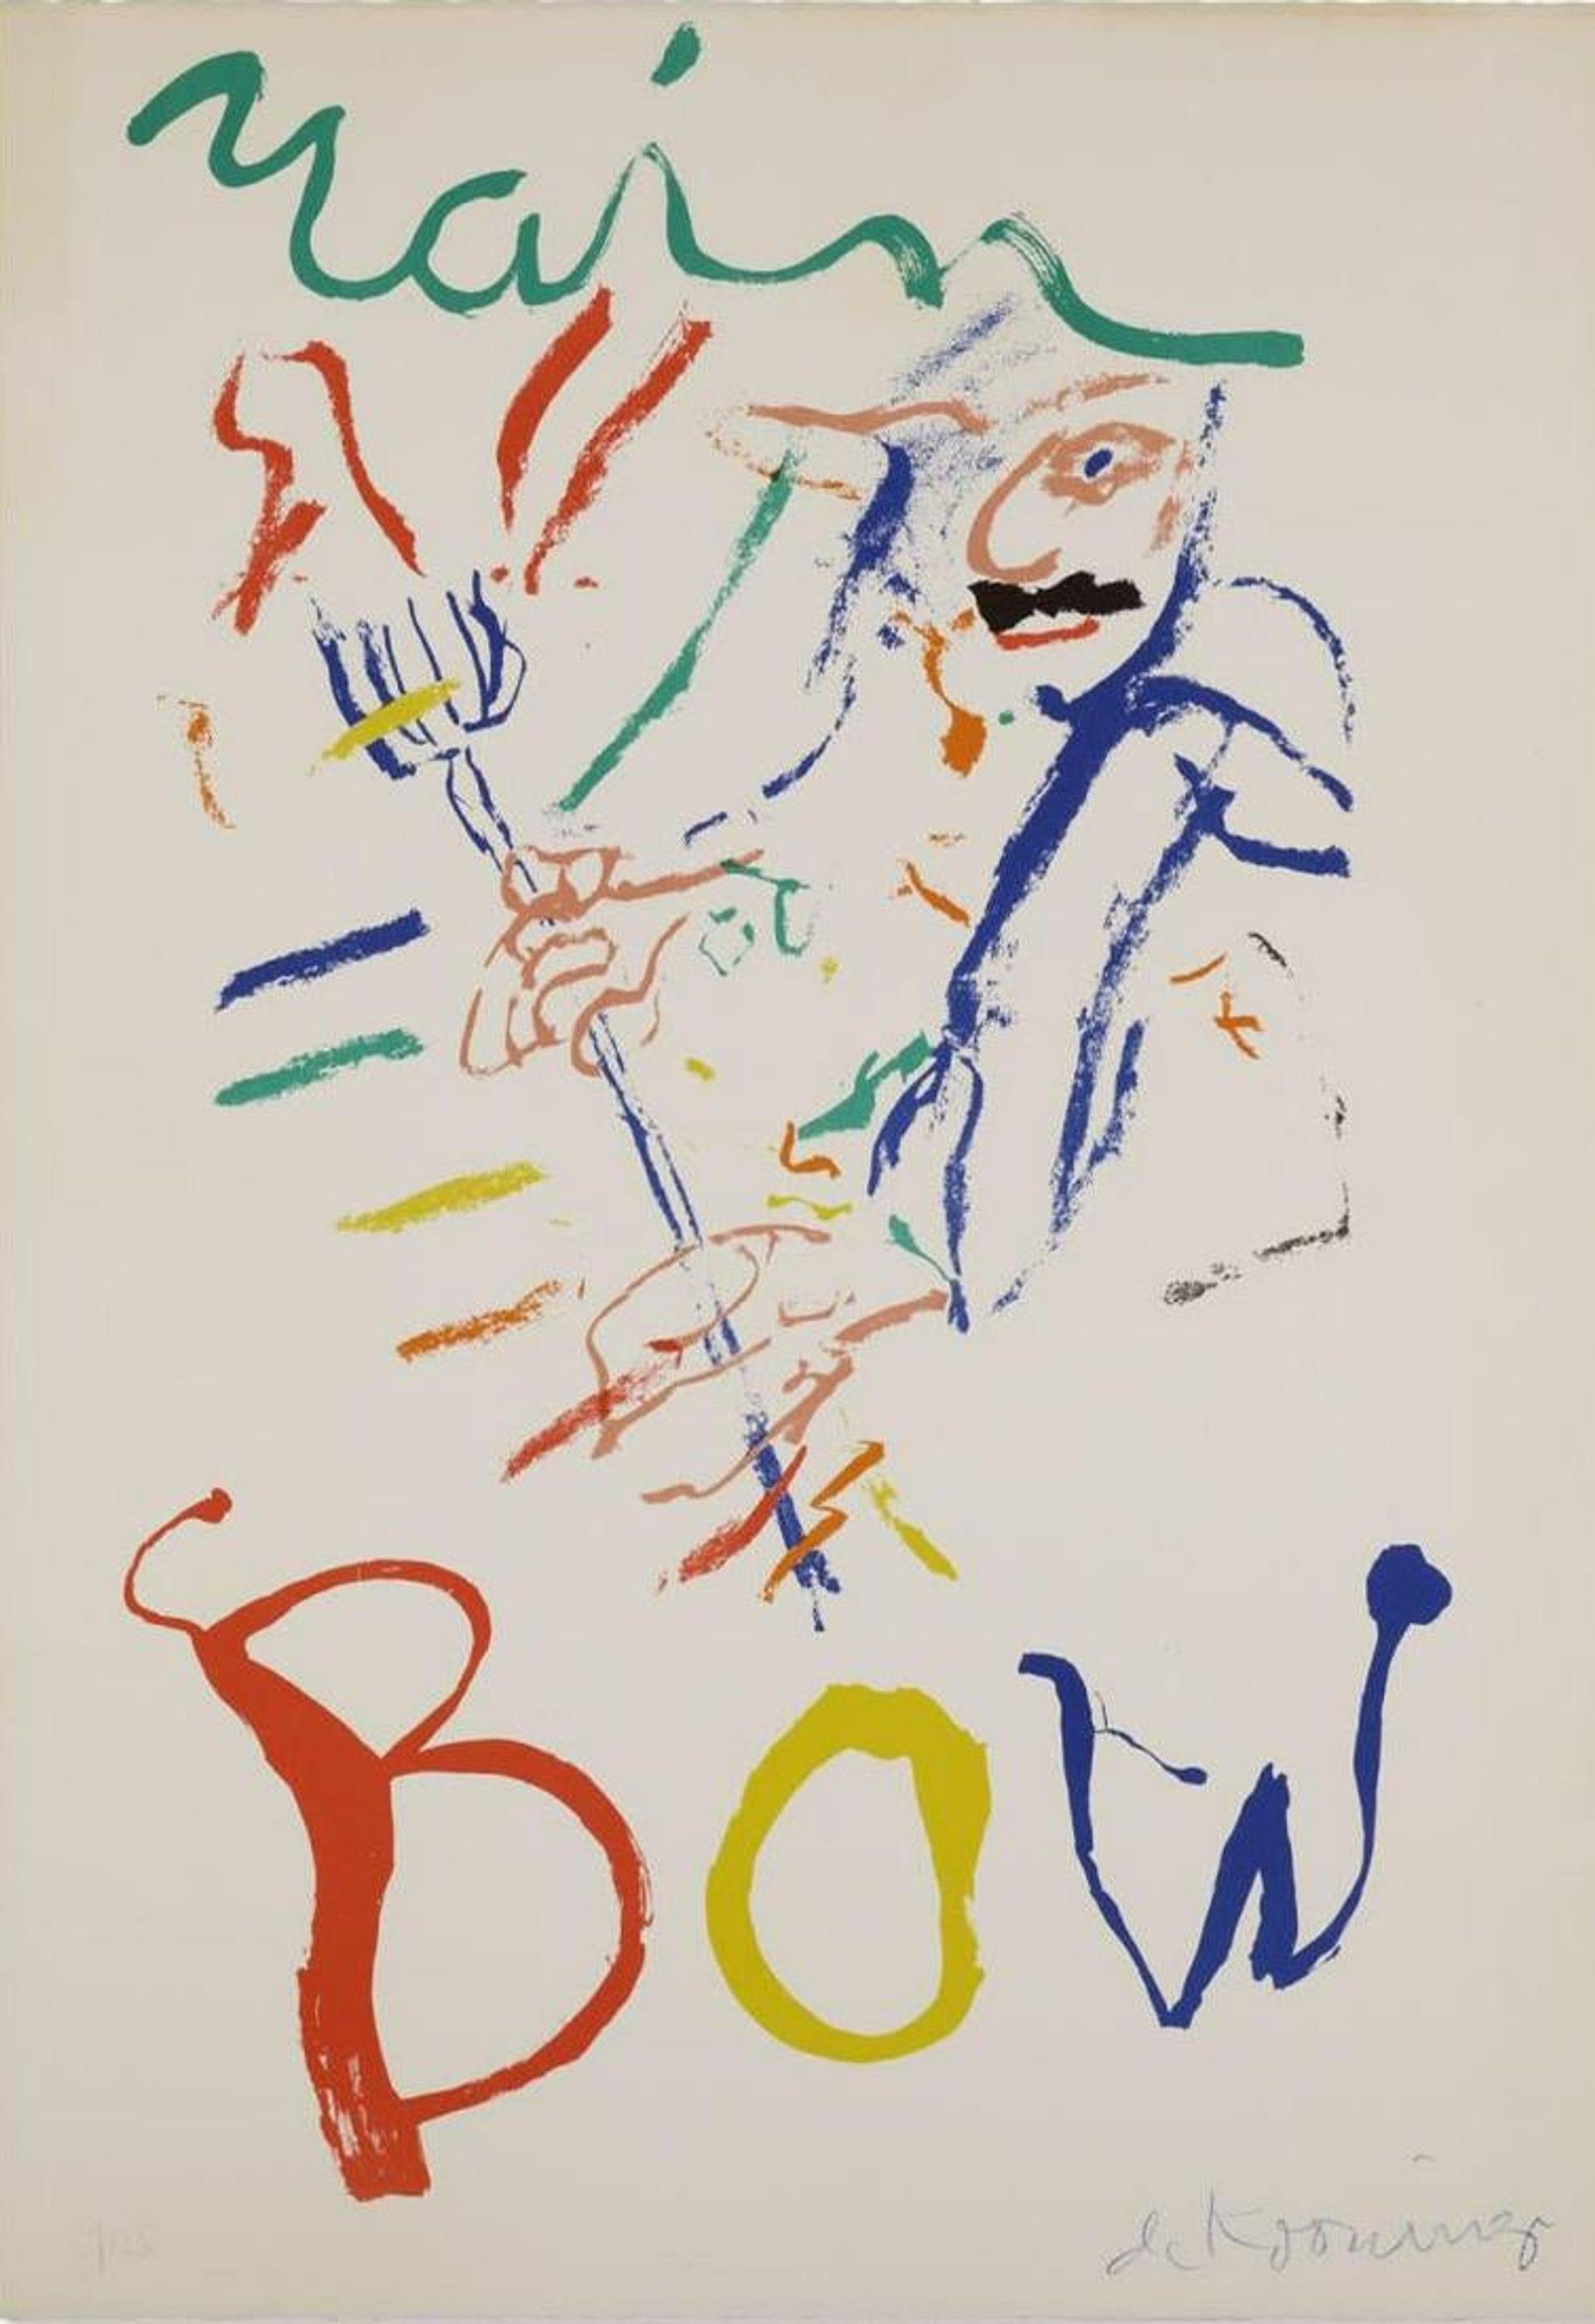 Rainbow: Thelonious Monk Devil at the Keyboard - Print by Willem de Kooning